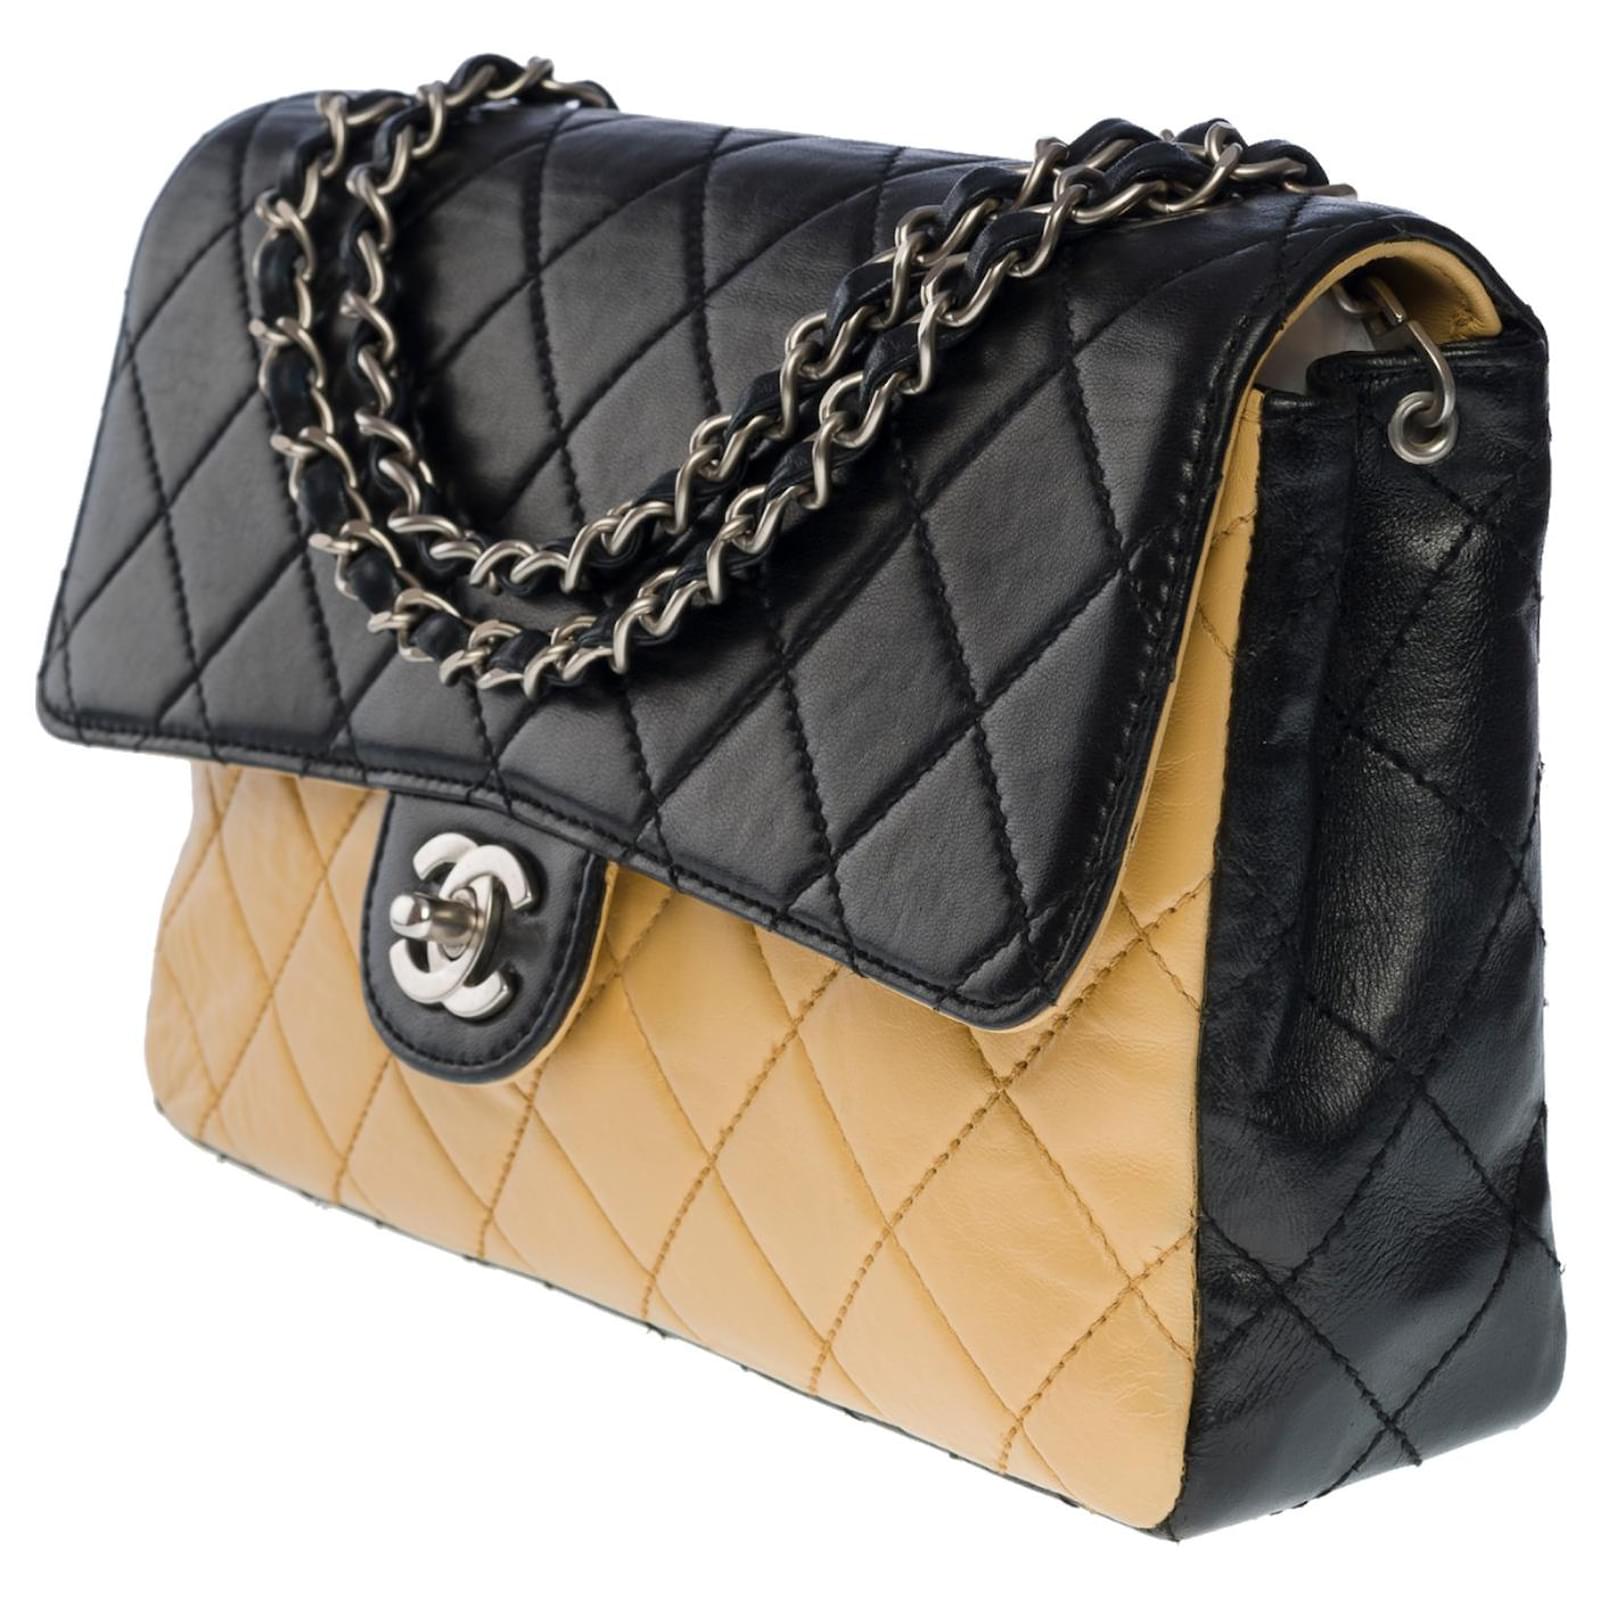 Lovely Chanel Timeless Medium limited edition single flap bag in